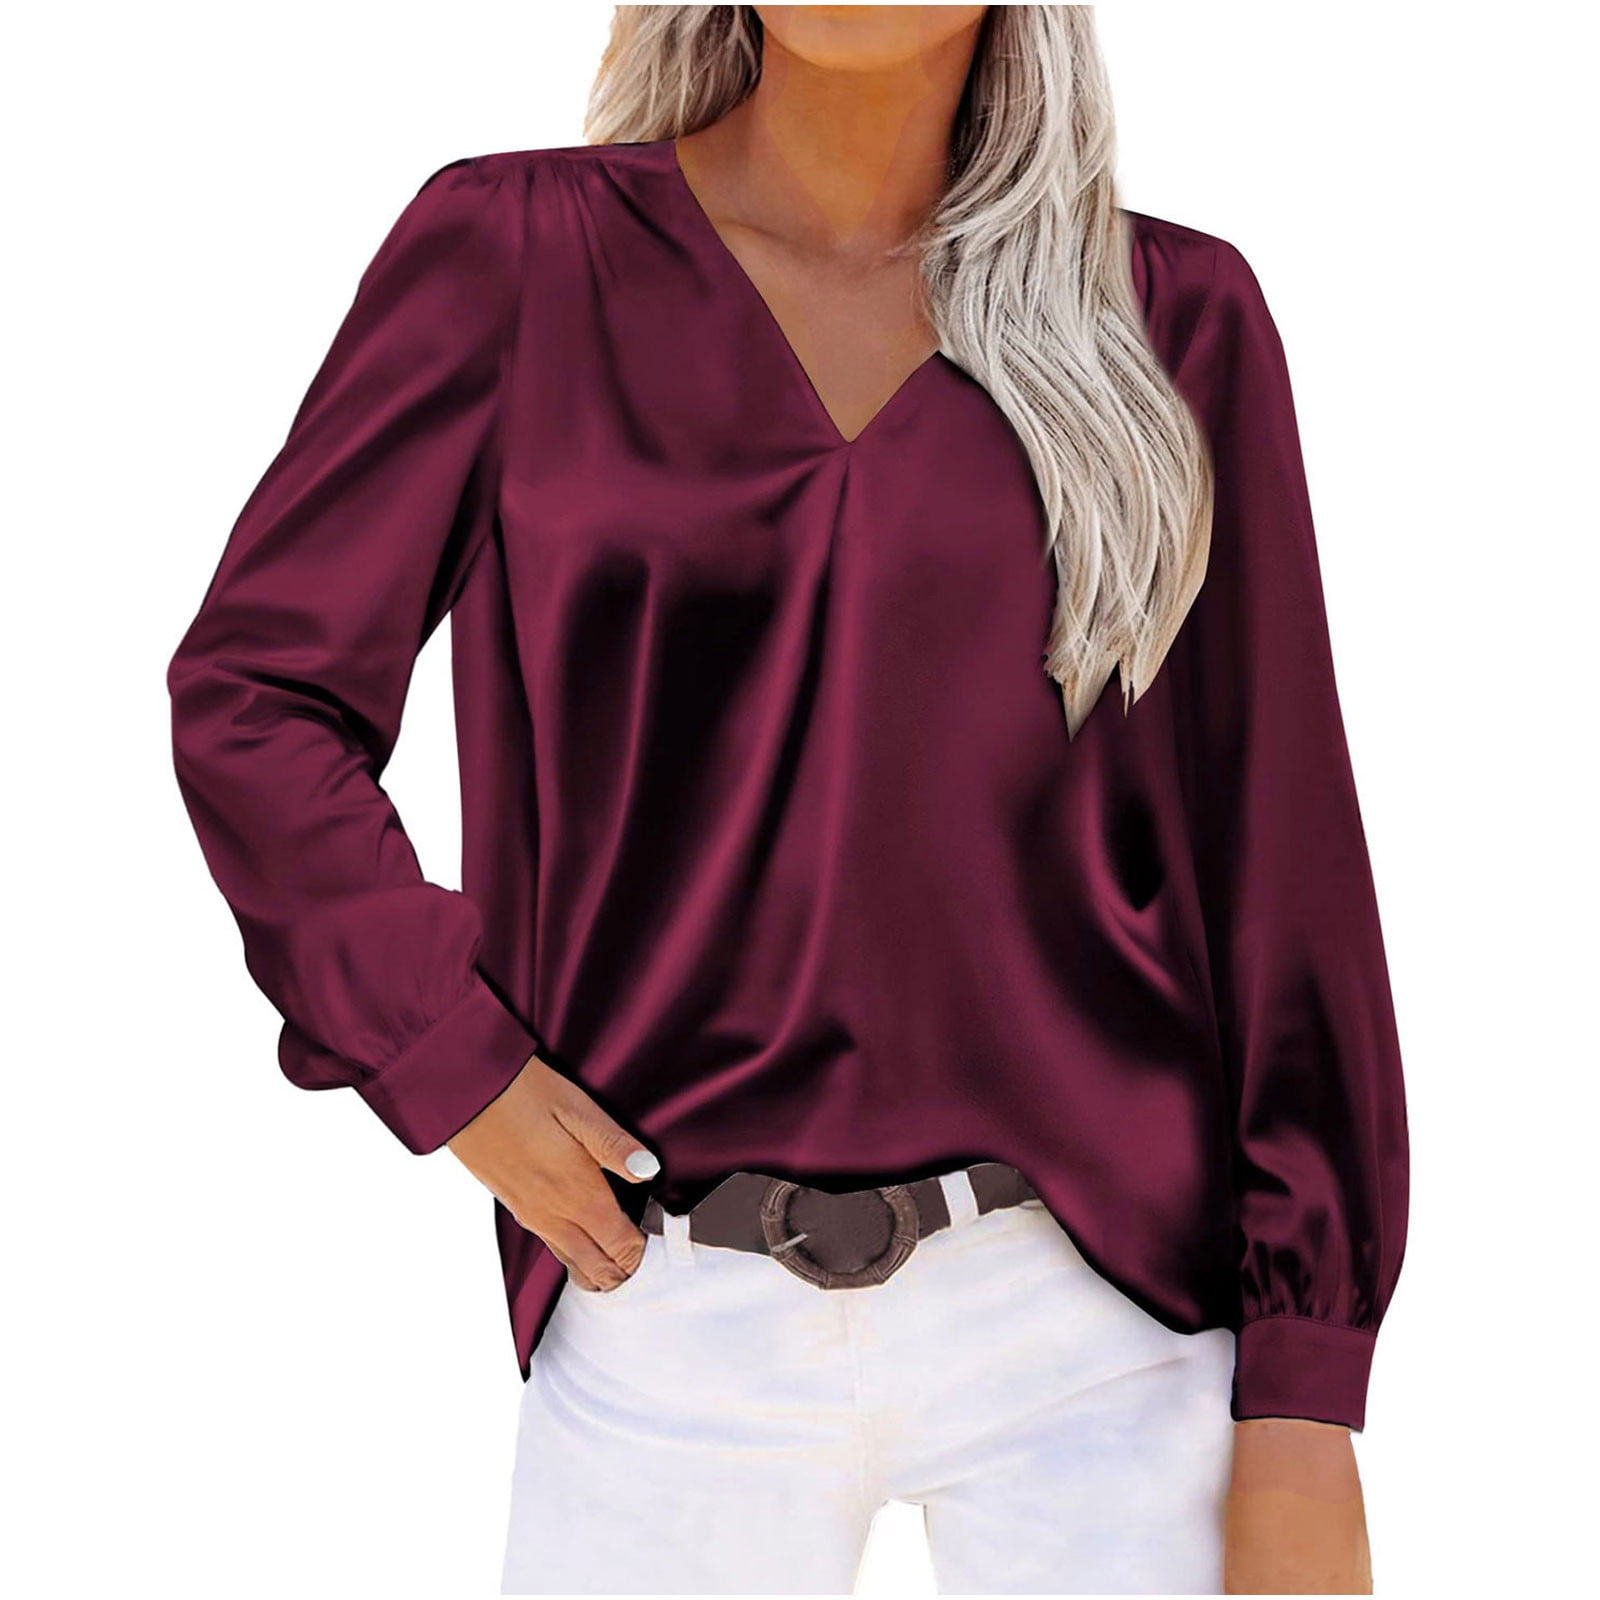 Casual Hollow Out Blouse Shirts Women Ruffle Elegant Cozy Quality